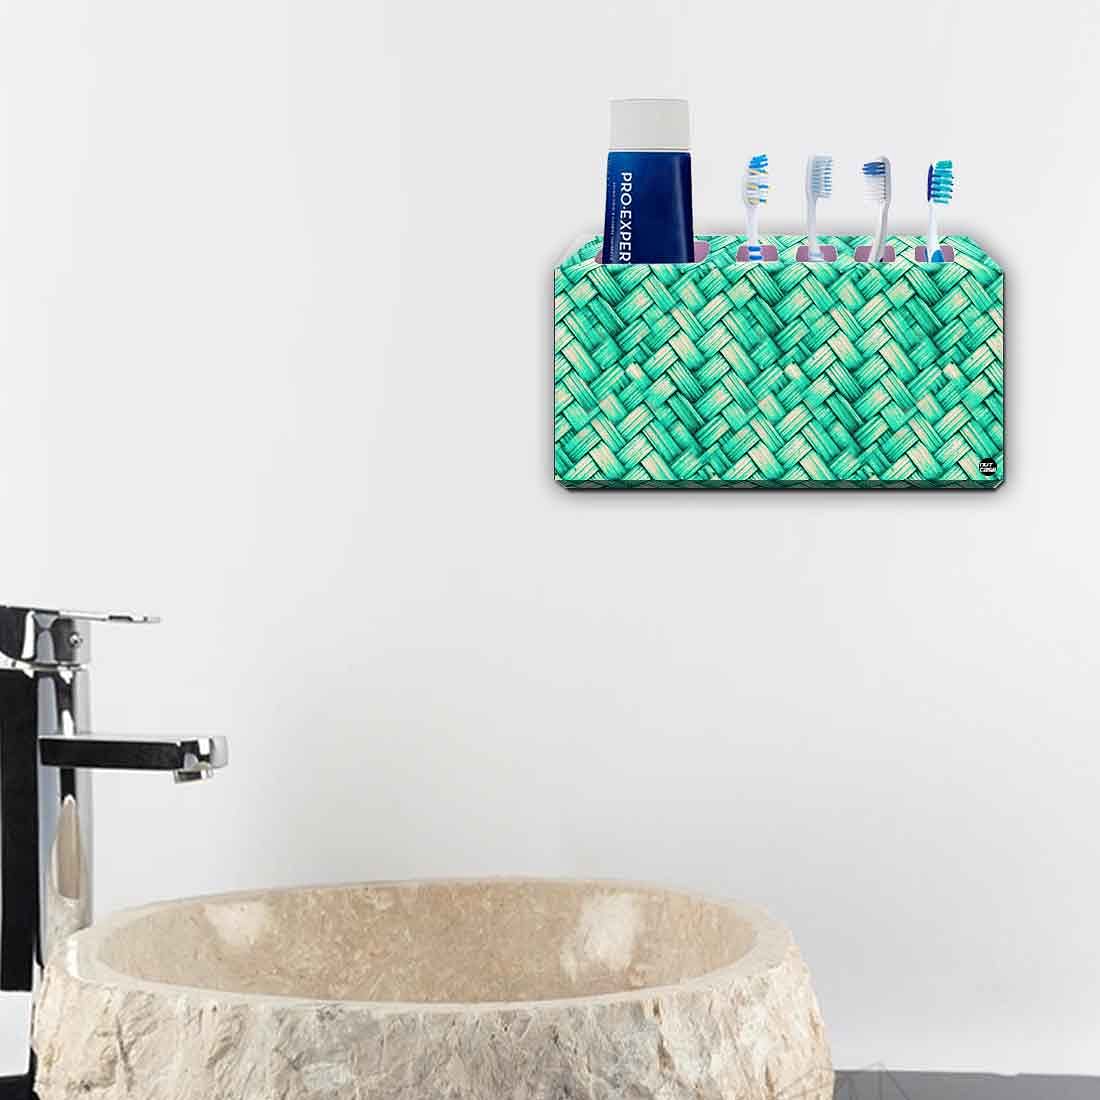 Toothbrush Holder Wall Mounted -Shade Color Triangle Nutcase